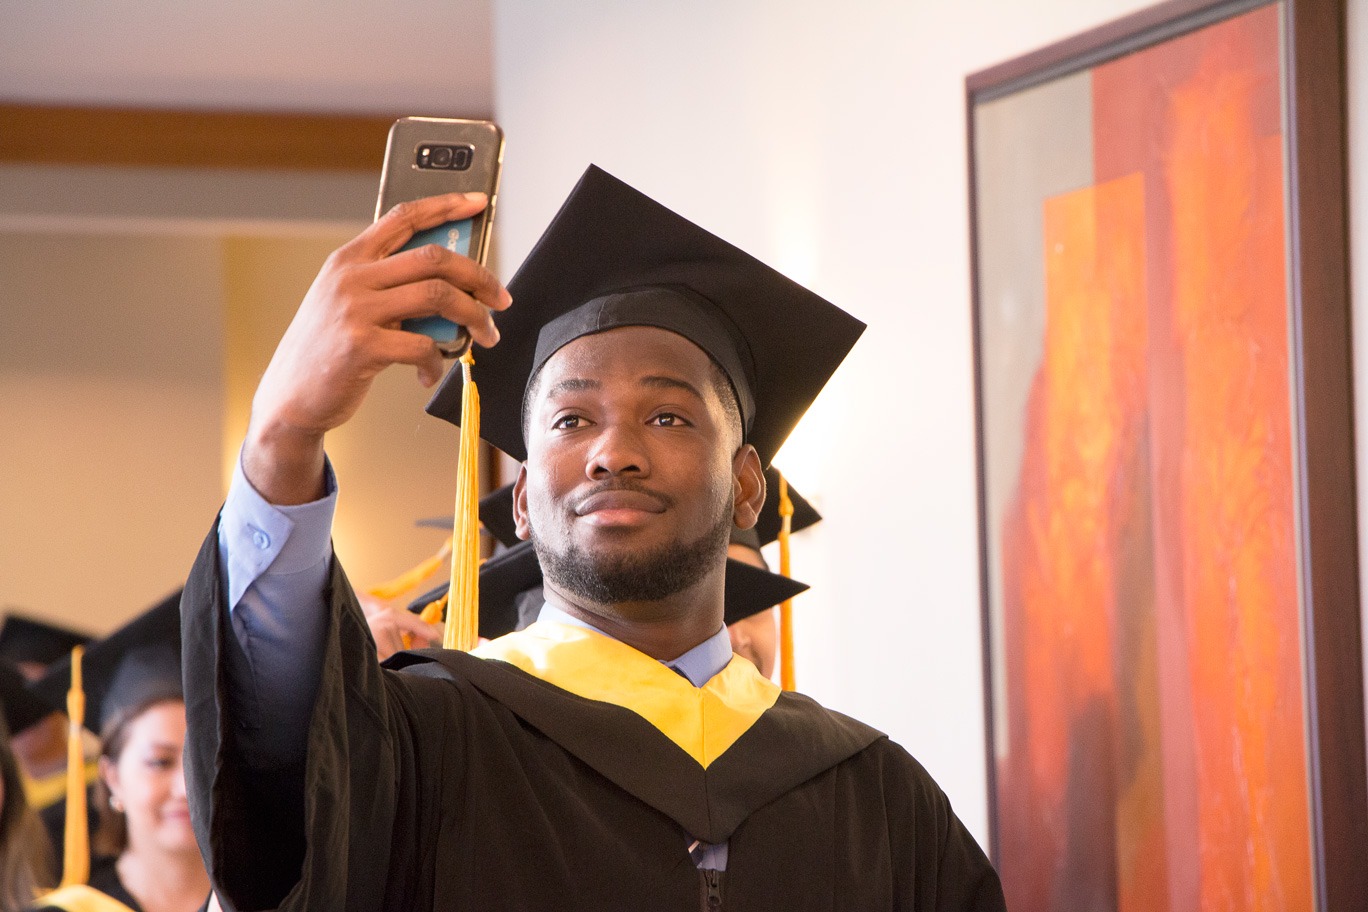 Brighton College graduate of 2018 taking a selfie before entering the ceremony processional.